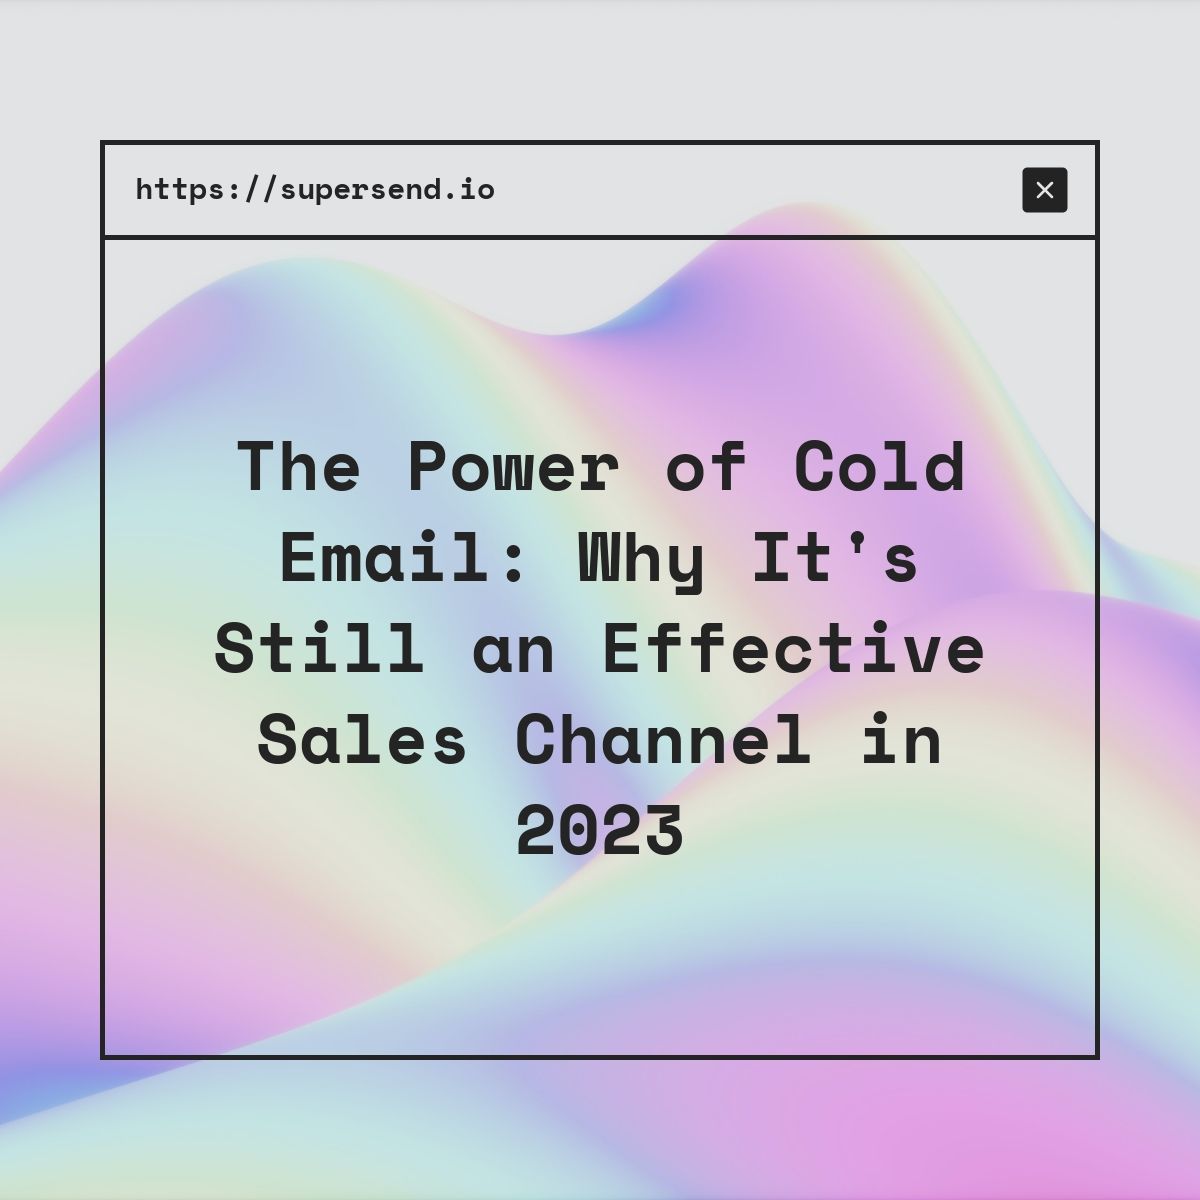 The Power of Cold Email: Why It's Still an Effective Sales Channel in 2023